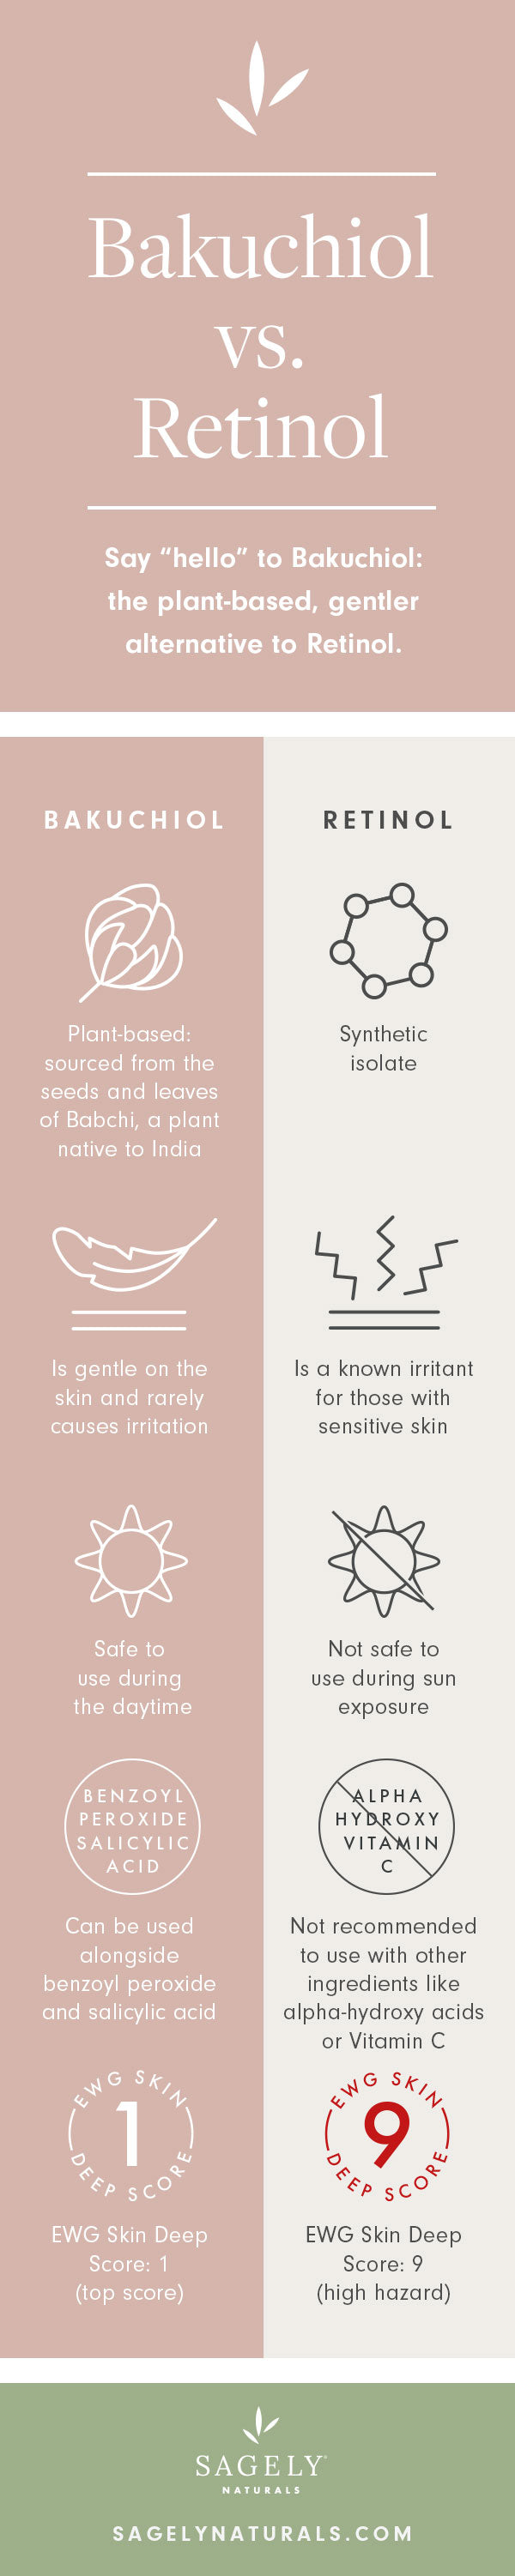 An infographic showing the difference between Bakuchiol and Retinol.